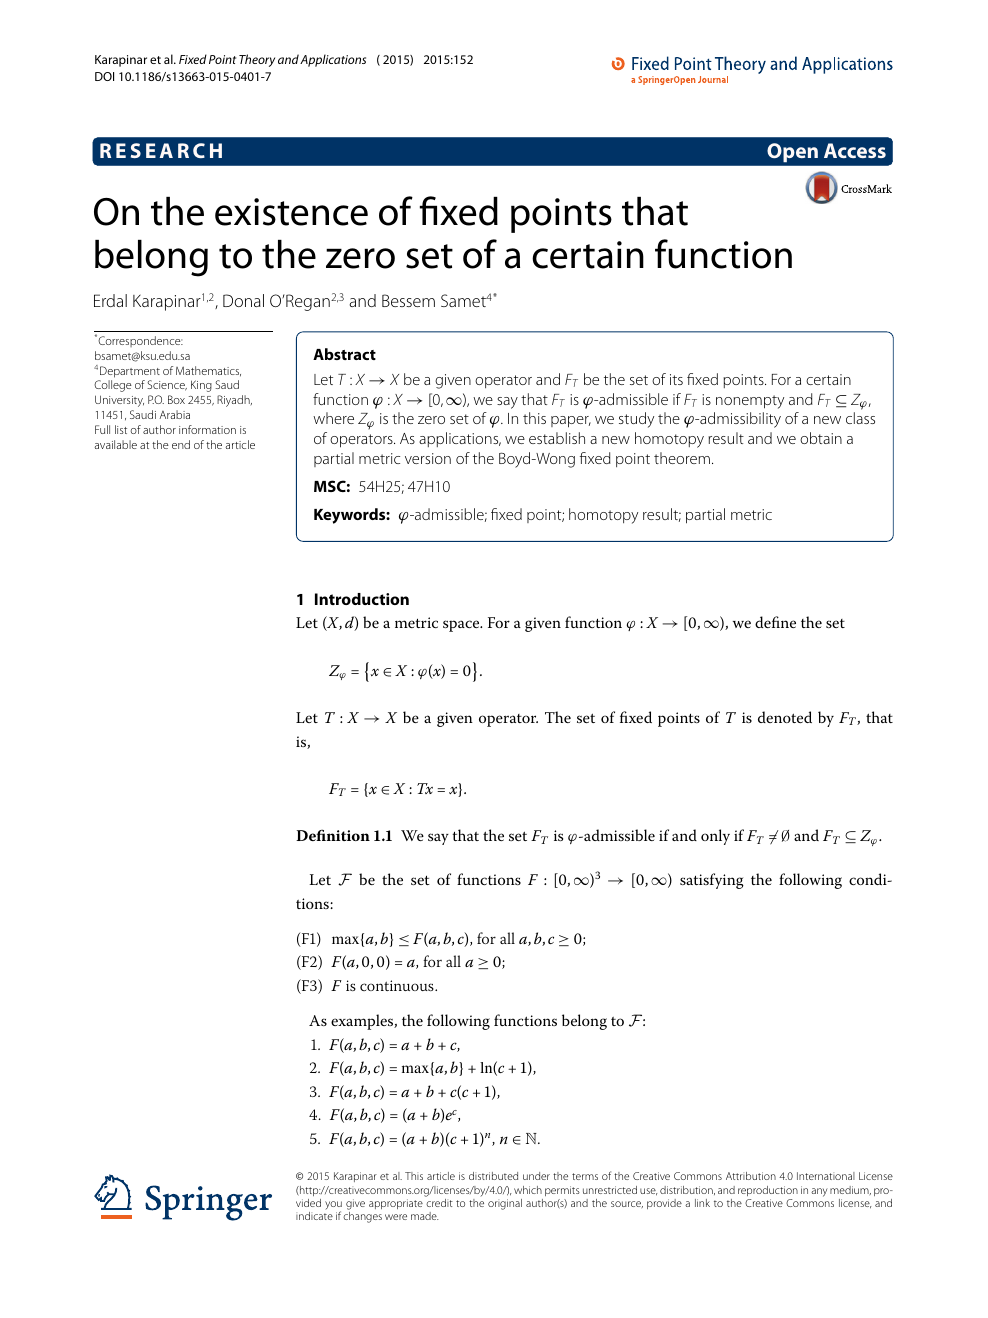 On The Existence Of Fixed Points That Belong To The Zero Set Of A Certain Function Topic Of Research Paper In Mathematics Download Scholarly Article Pdf And Read For Free On